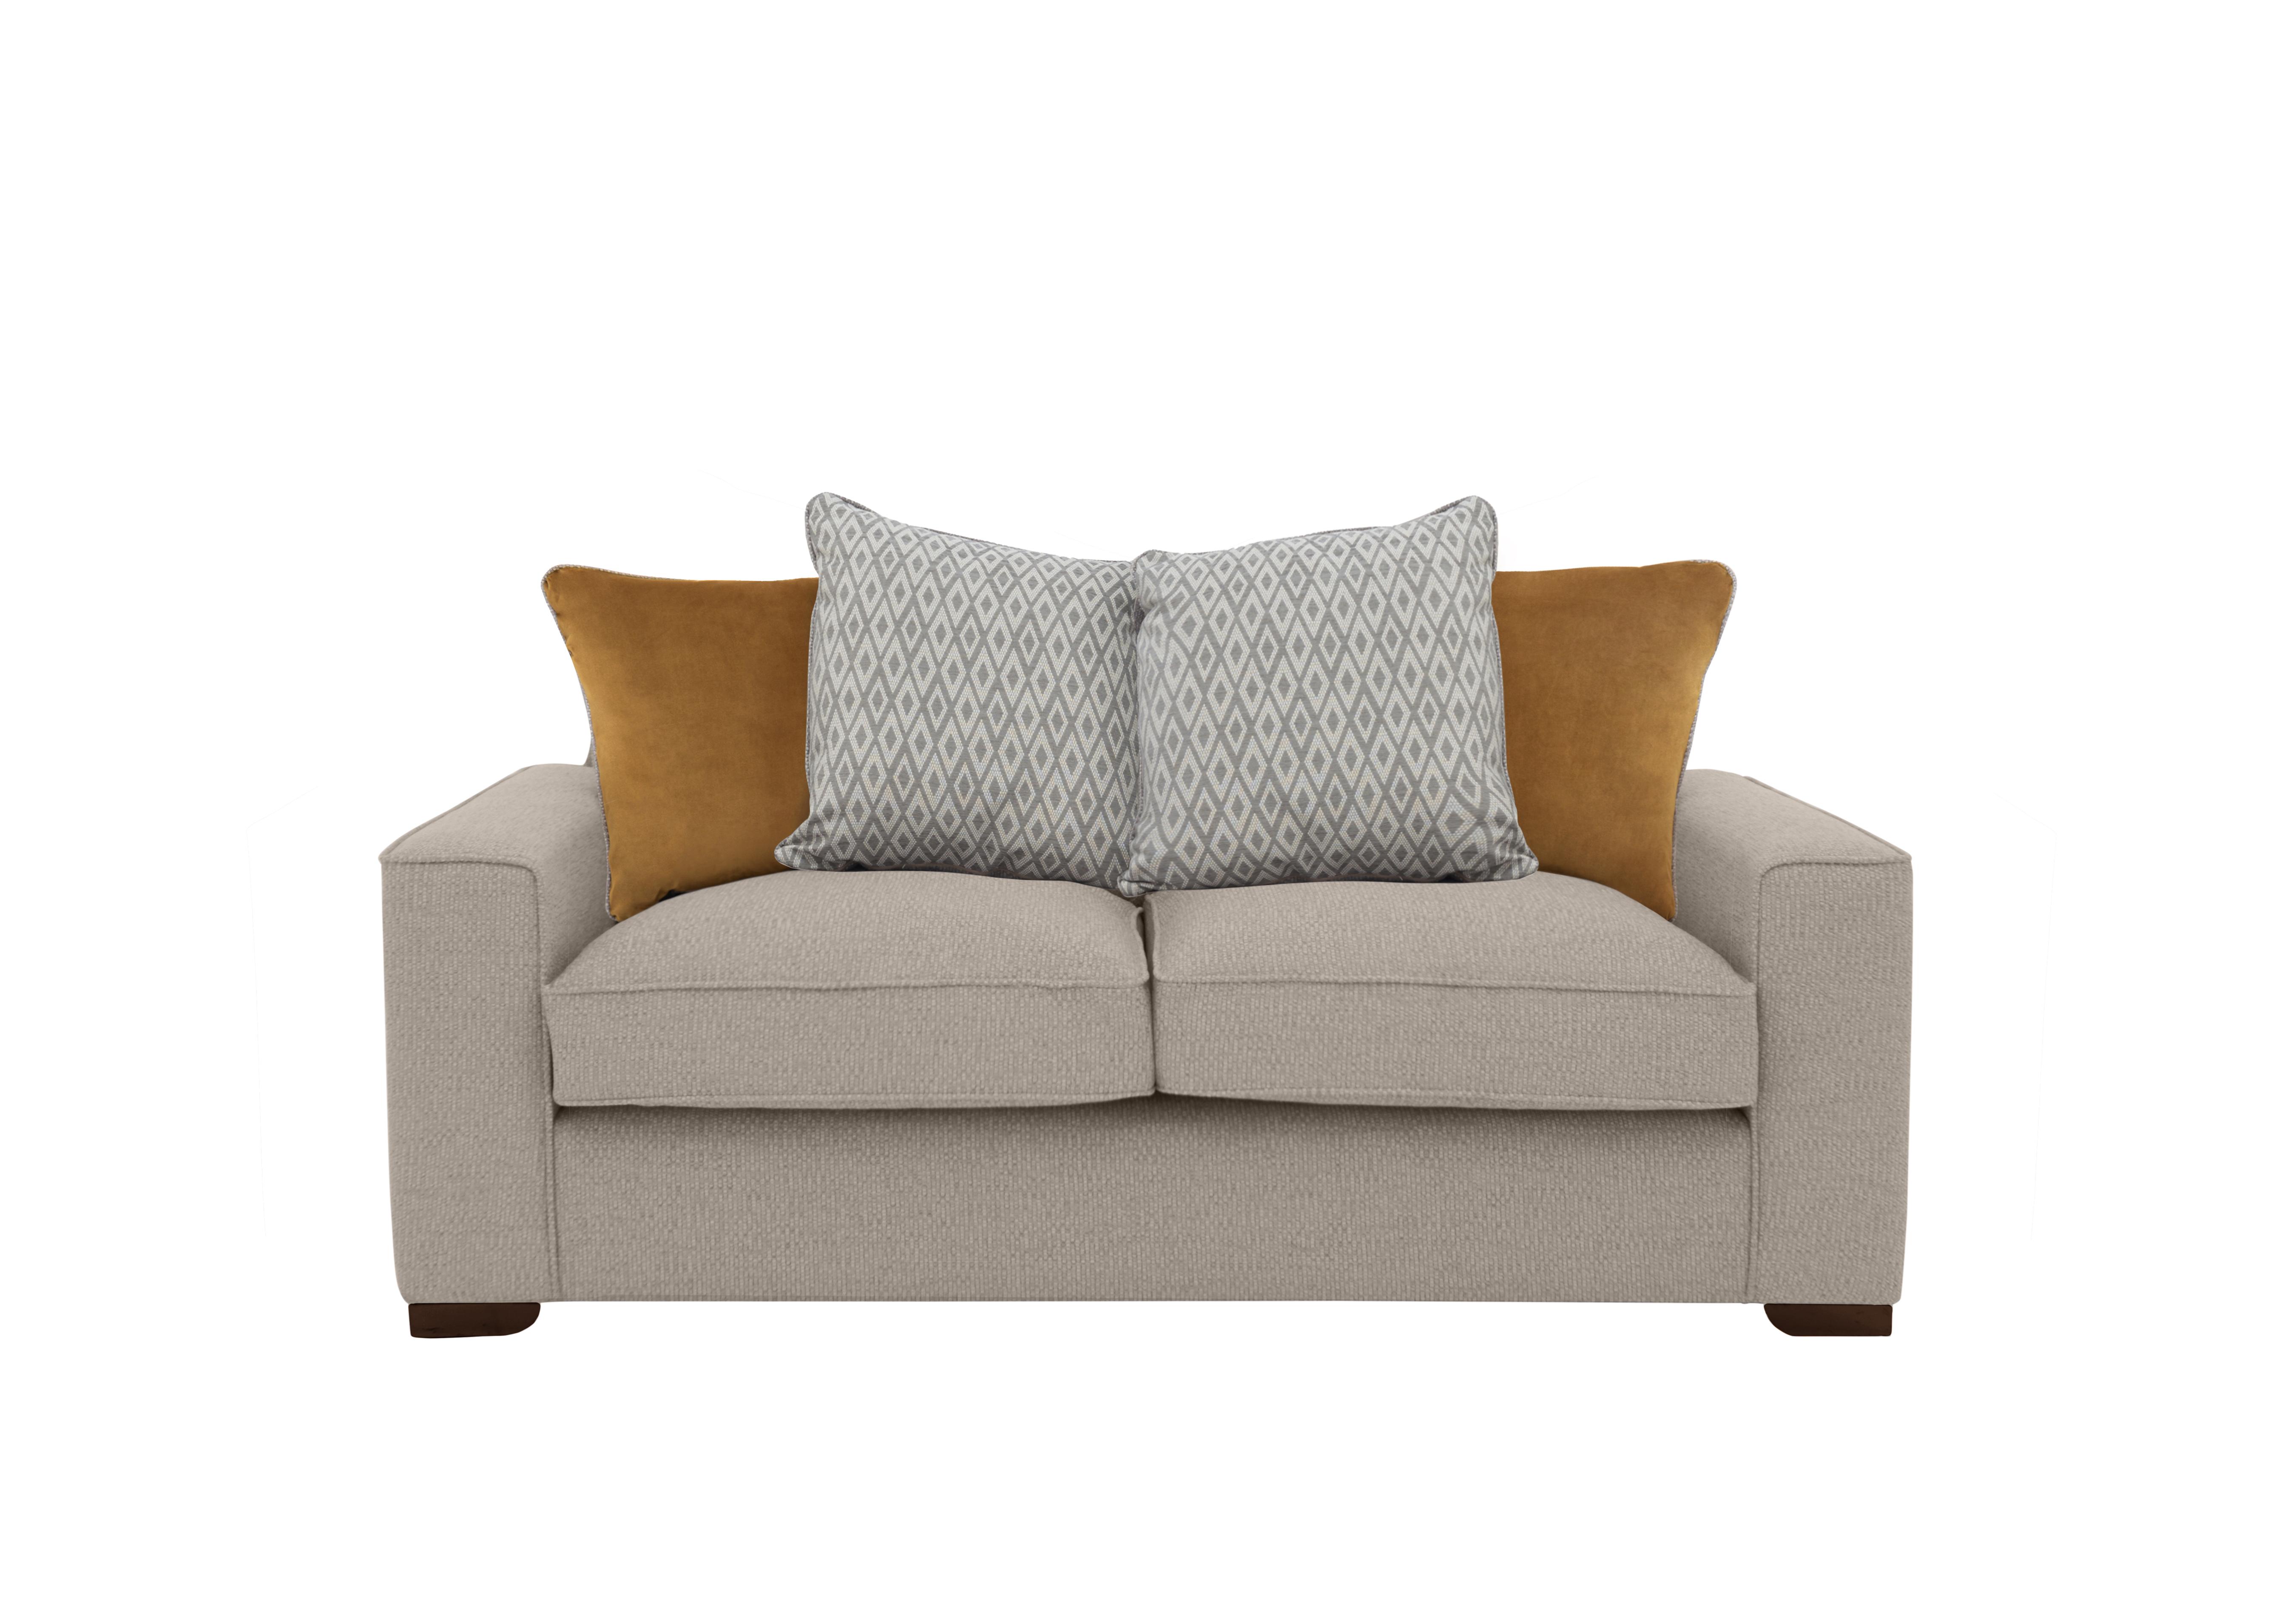 Cory 2 Seater Fabric Scatter Back Sofa Bed in Dallas Natural Mustard Pack on Furniture Village